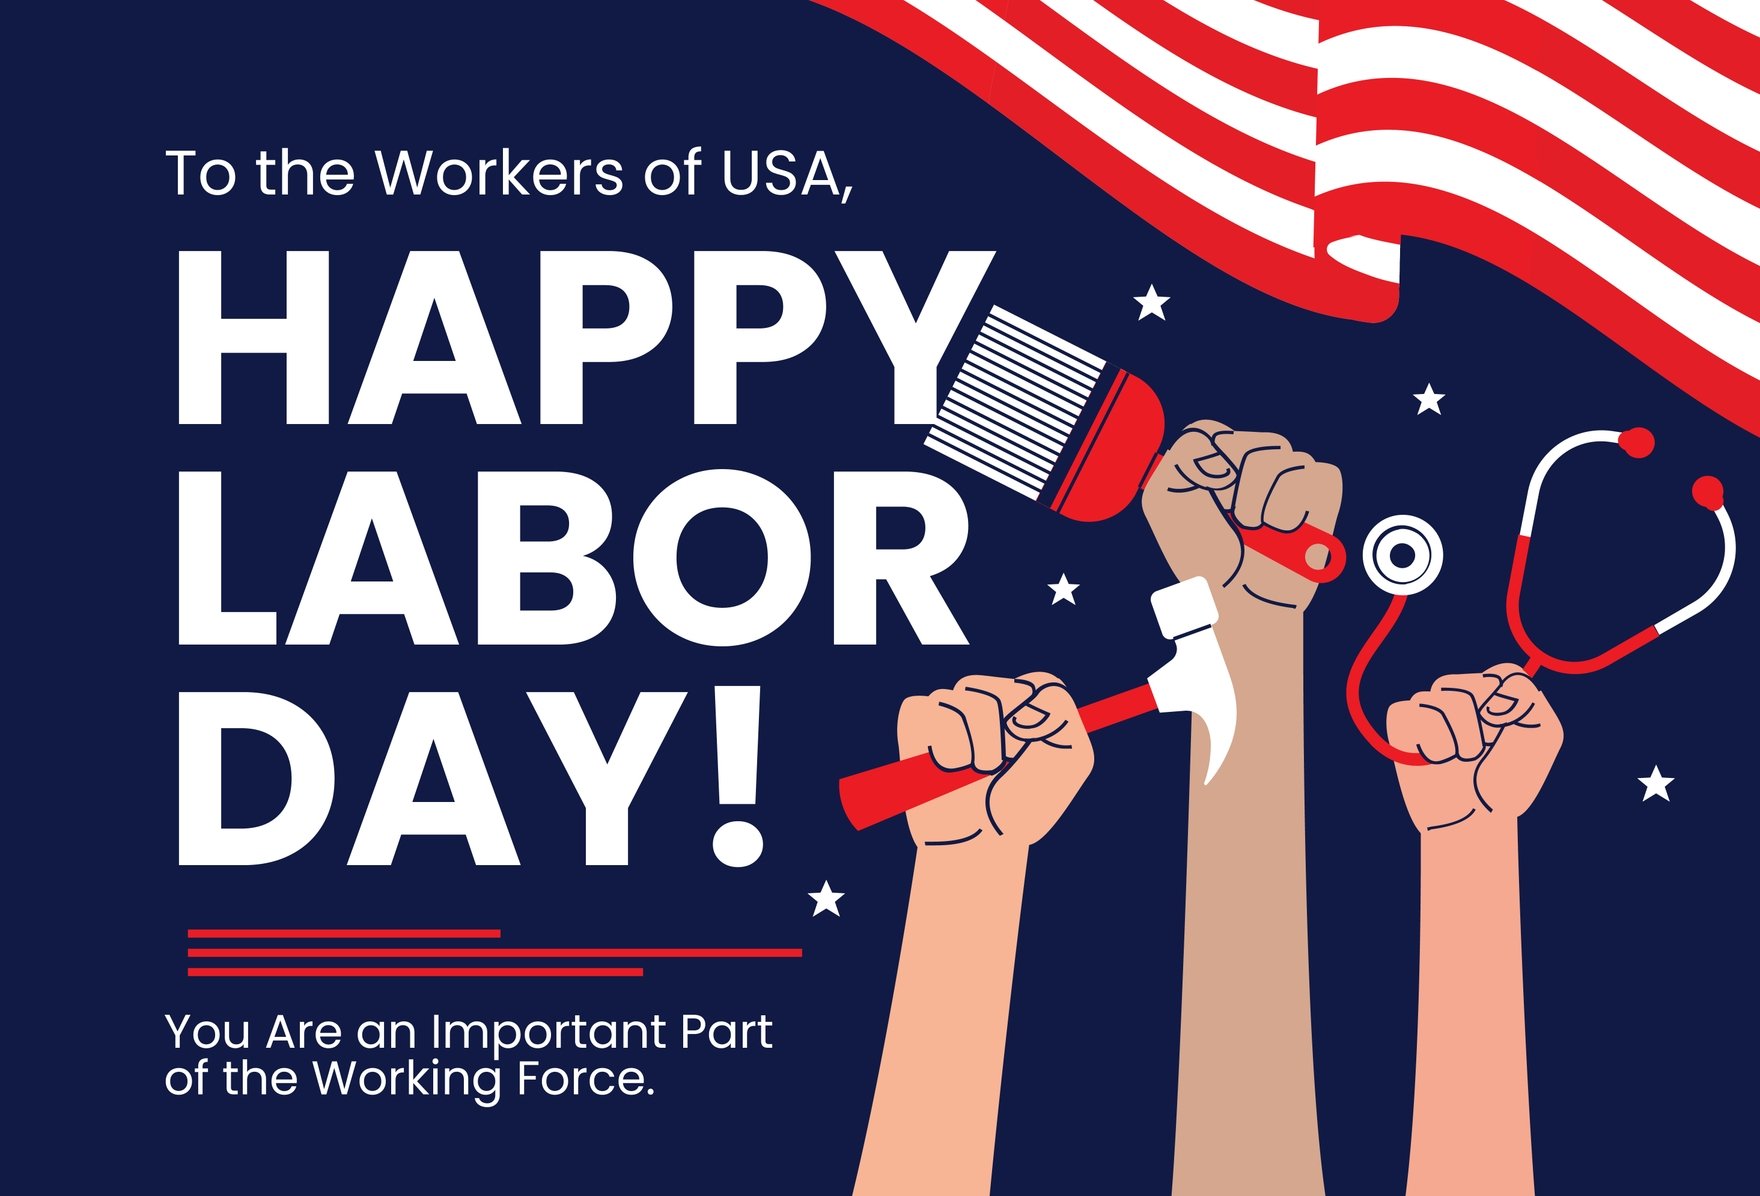 USA Labor Day Greeting Card in PSD, Illustrator, Word Download